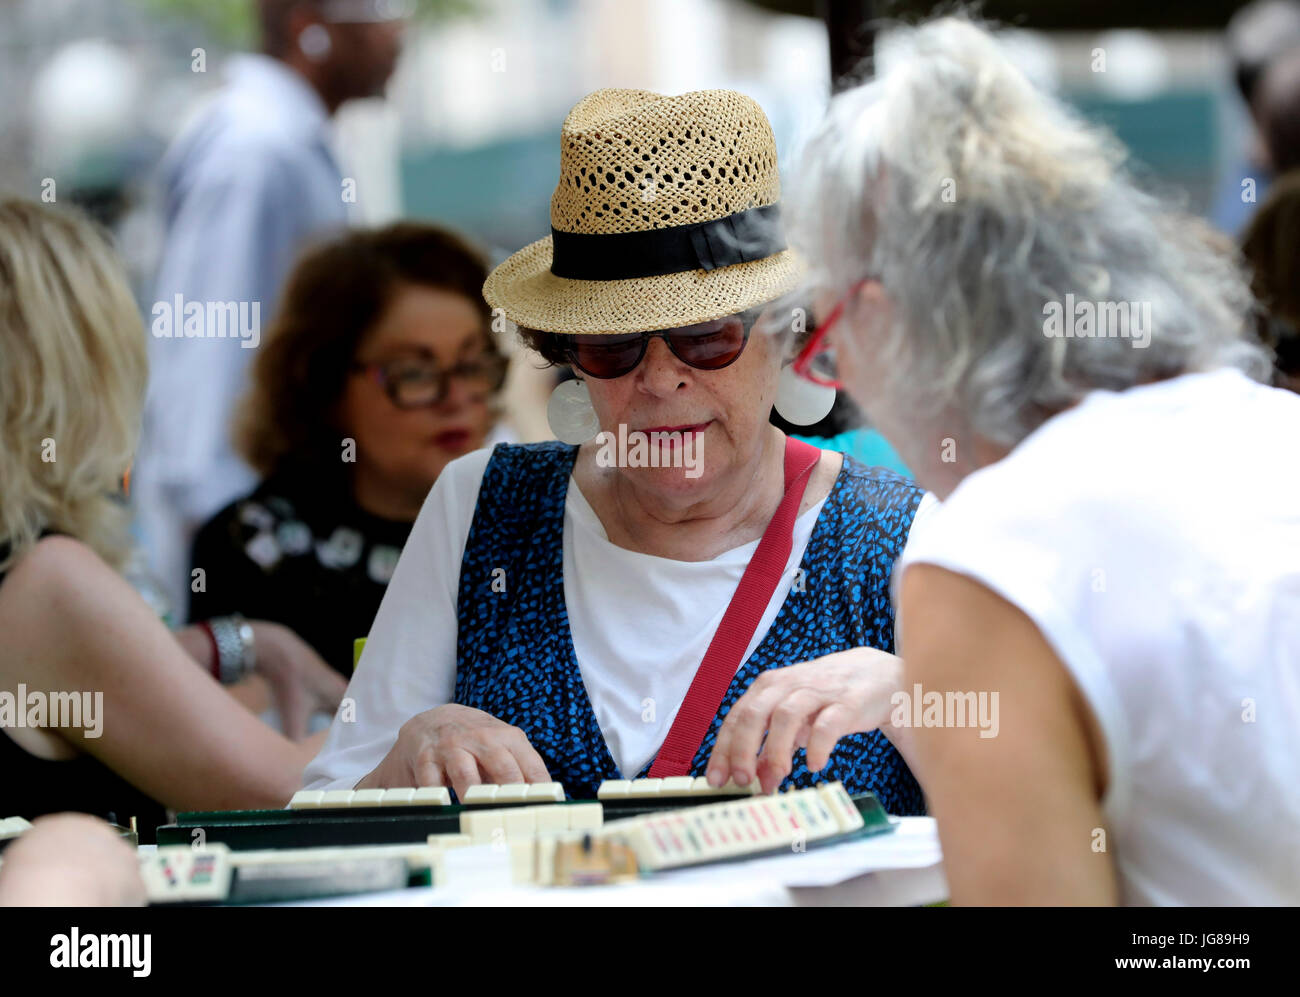 New York, USA. 3rd July, 2017. Hobbyists play Mah Jongg during the 'Mah Jongg Marathon' event at Bryant Park in New York City, the United States, on July 3, 2017. According to event organizer Linda Fisher, the event is organized to provide a place for Mah Jongg hobbyists to communicate with each other and promote the game to more people. Mah Jongg, originated from China, was introduced to the United States in the 1920s. Credit: Wang Ying/Xinhua/Alamy Live News Stock Photo